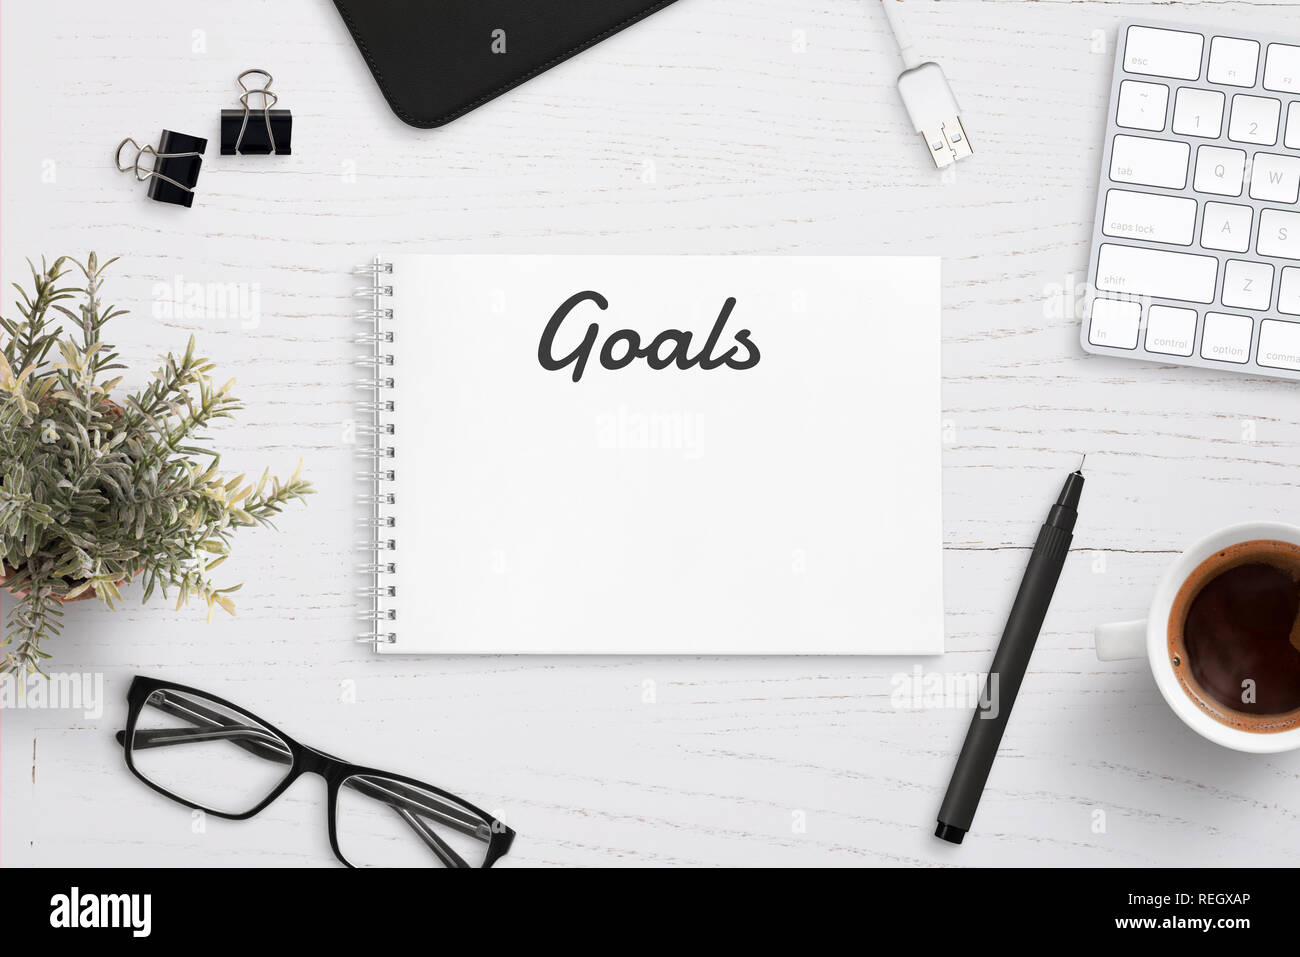 Creating goals list on notepad on office desk surrounded with office supplies. White wooden work desk. Stock Photo